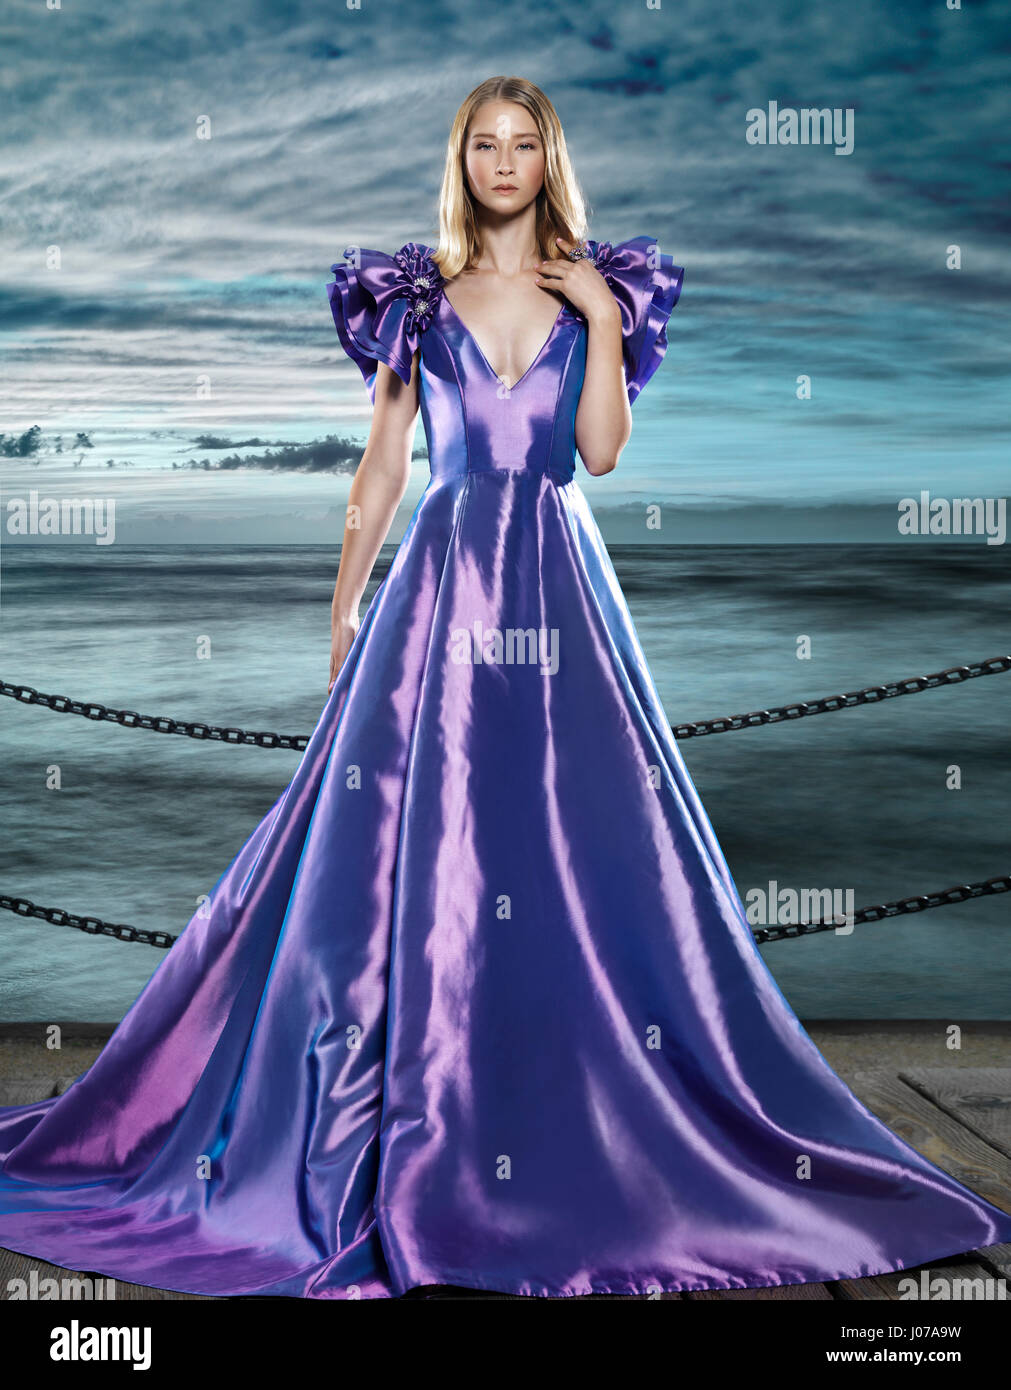 Young blond woman wearing a beautiful long blue dress, evening gown, at waterfront, artistic fashion portrait Stock Photo